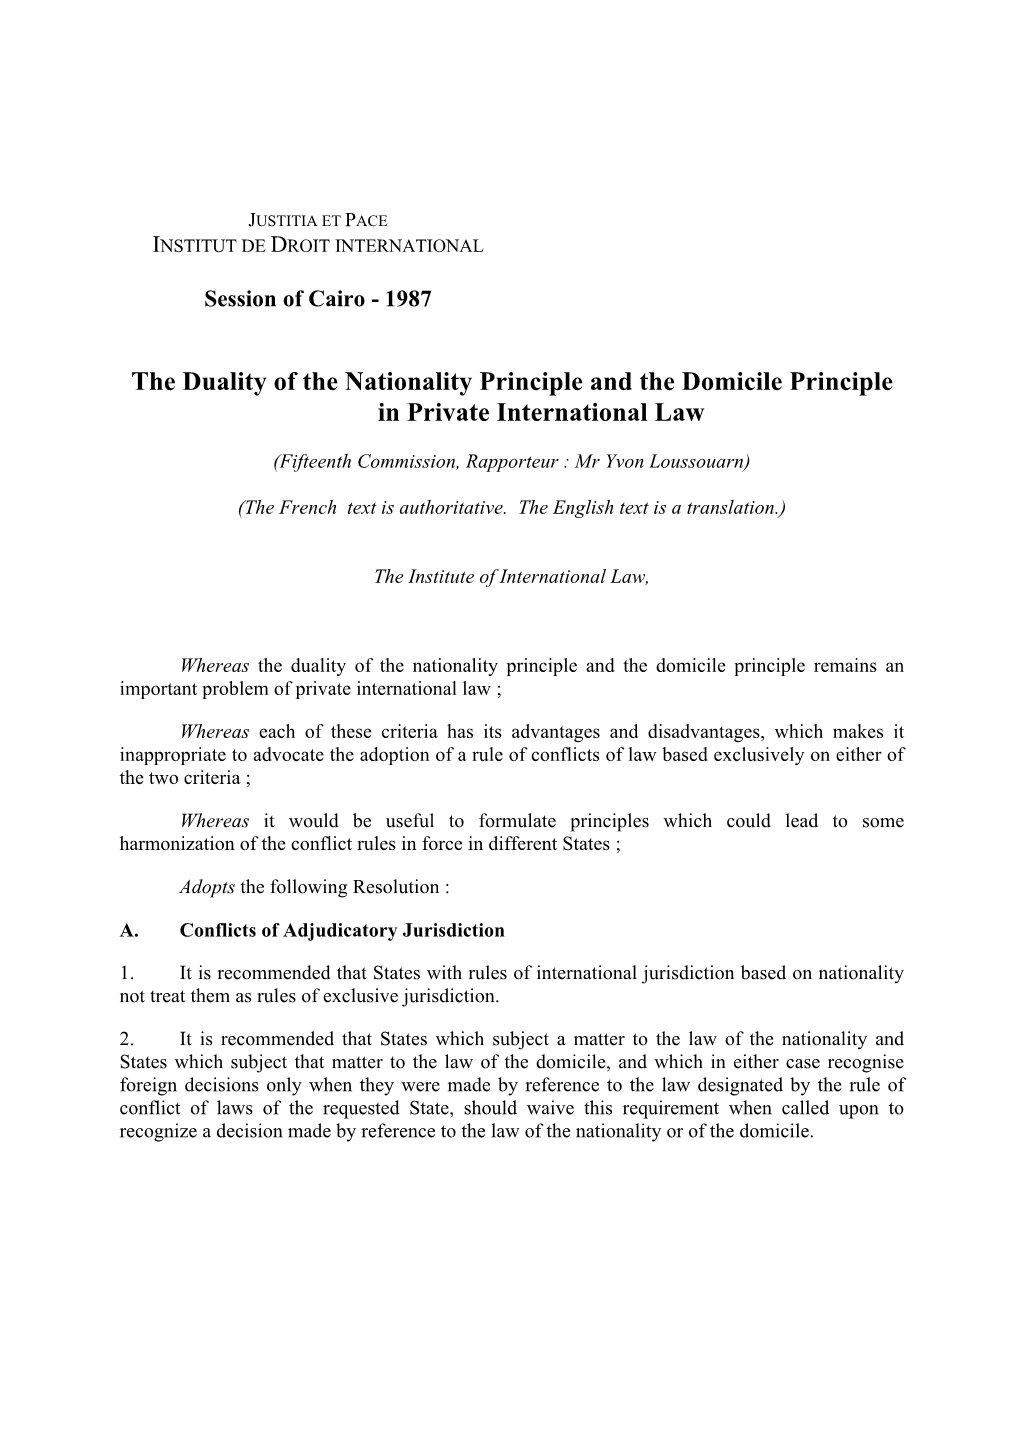 The Duality of the Nationality Principle and the Domicile Principle in Private International Law